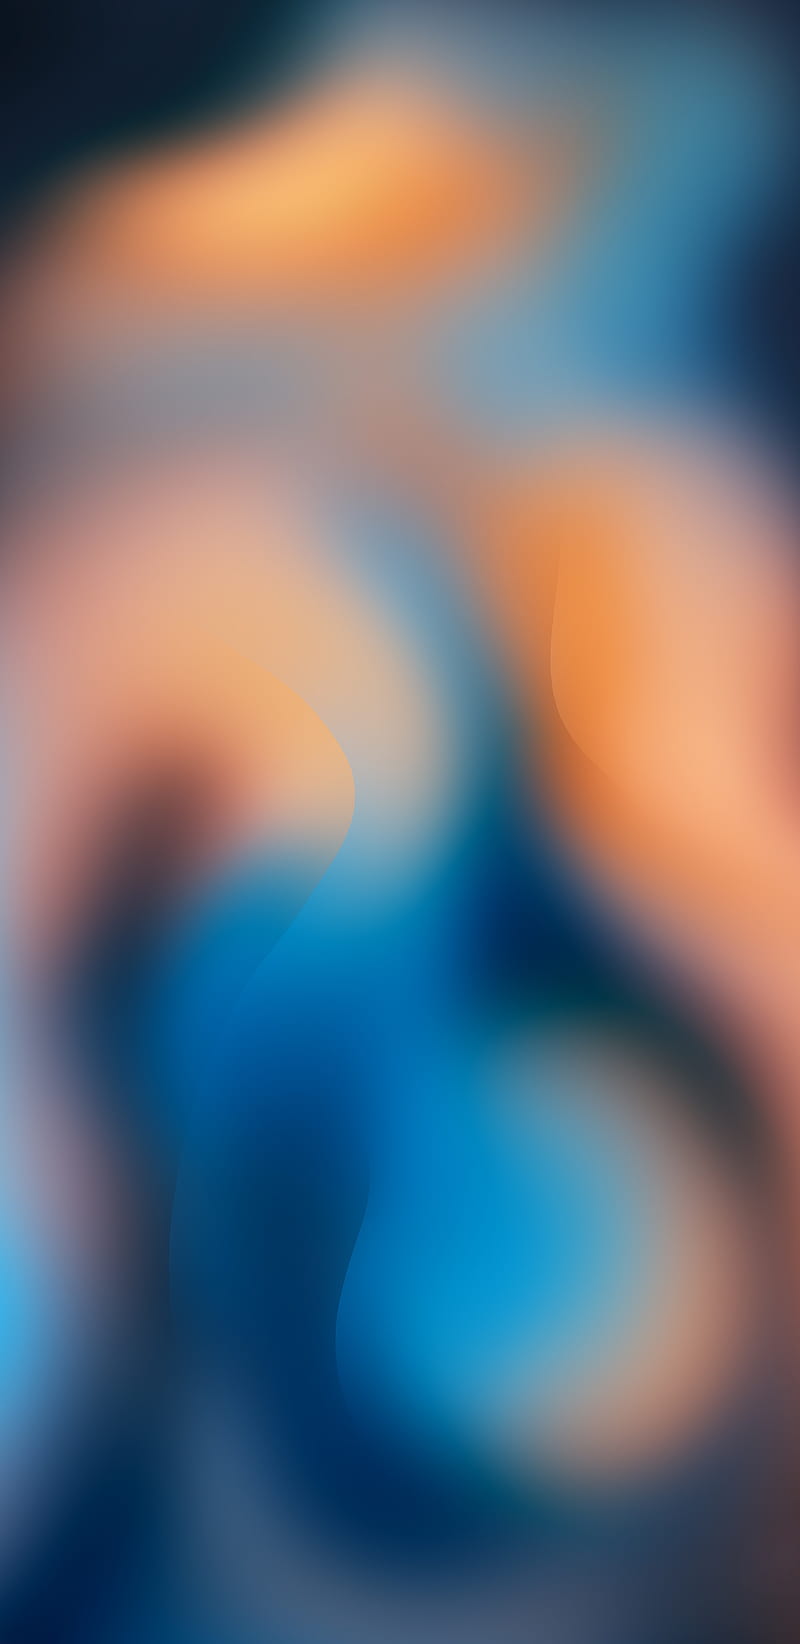 iPhoney, 929, abstract, blurred, colors, cool, iphone, new, soft, HD phone wallpaper